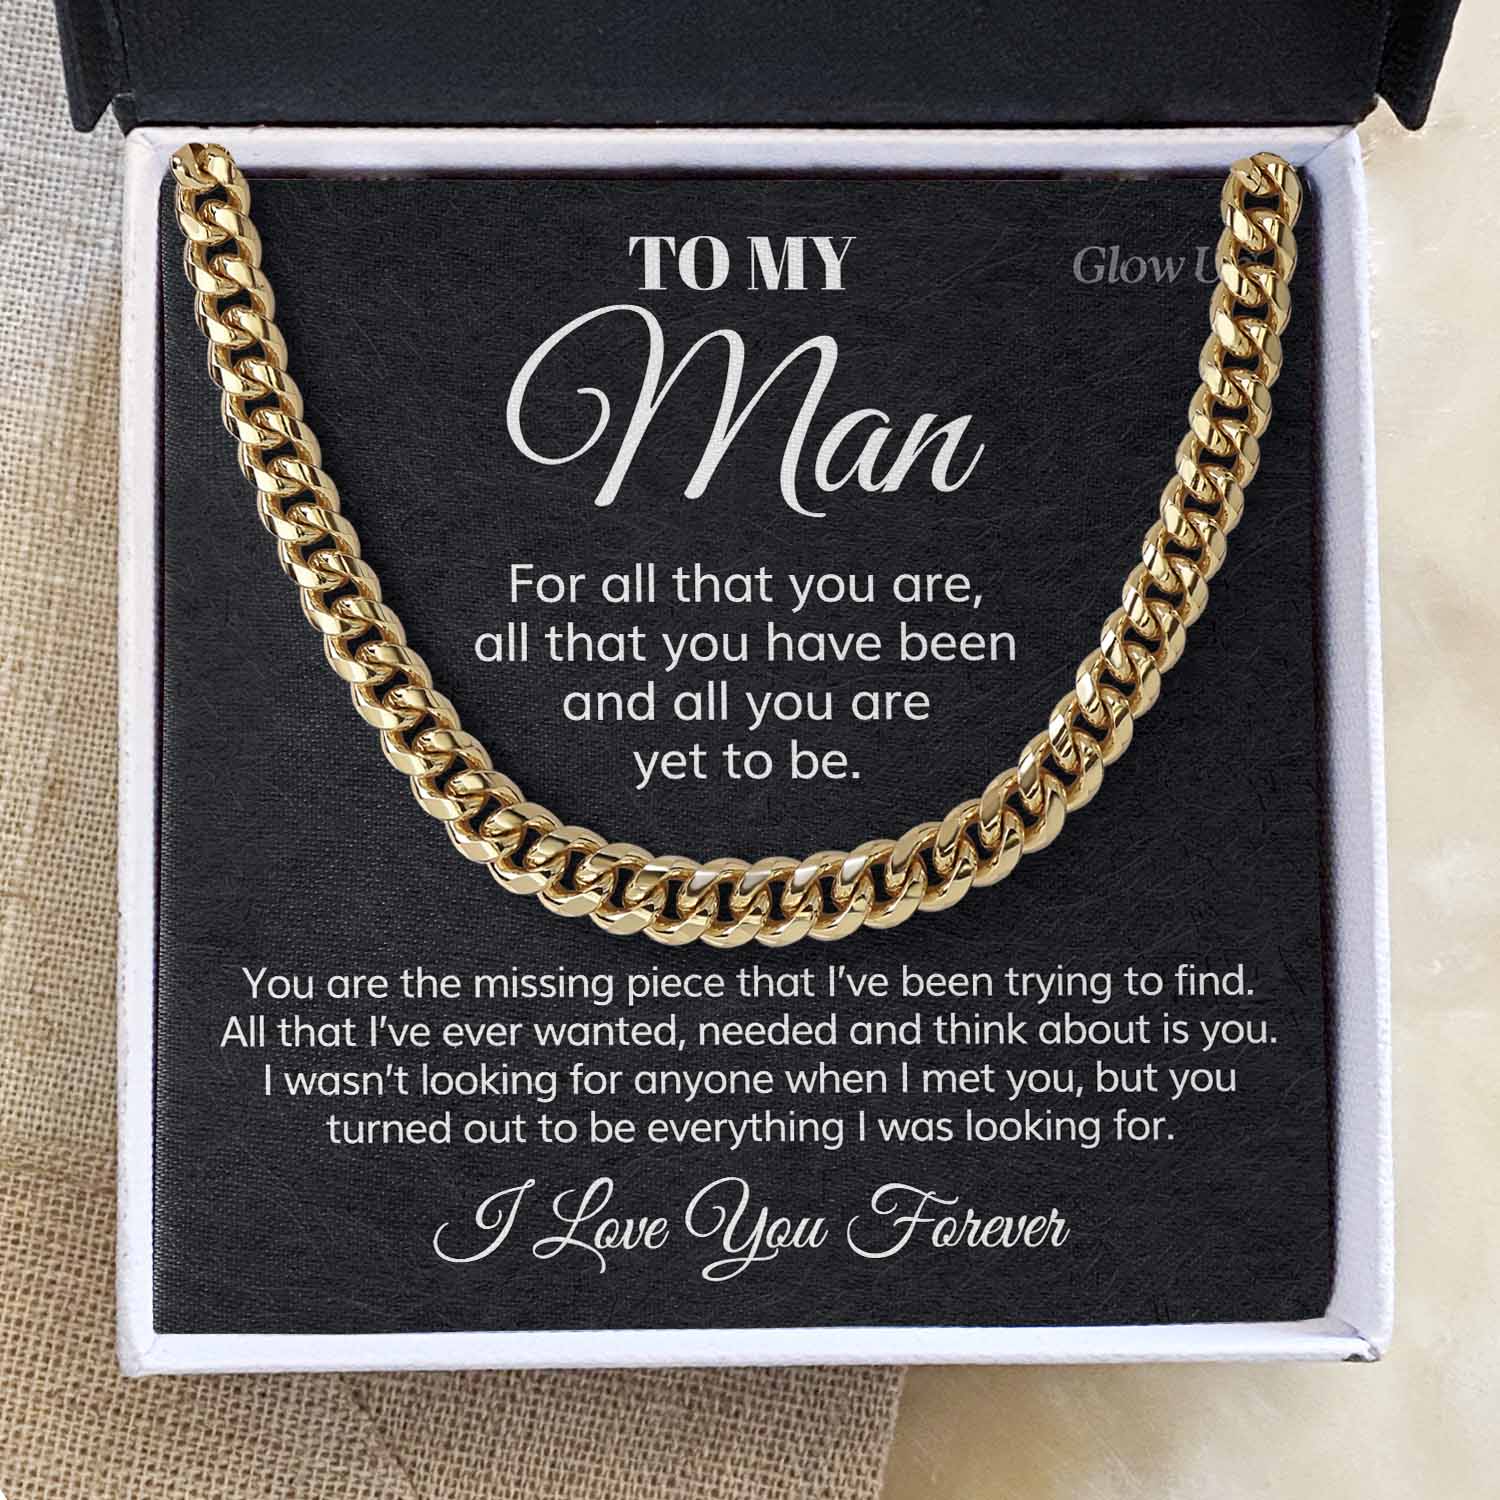 Glow Up Cuban Link Chain 18k Gold Over Stainless Steel / Two Toned Box To my Man - Cuban Link Chain - For all that you are